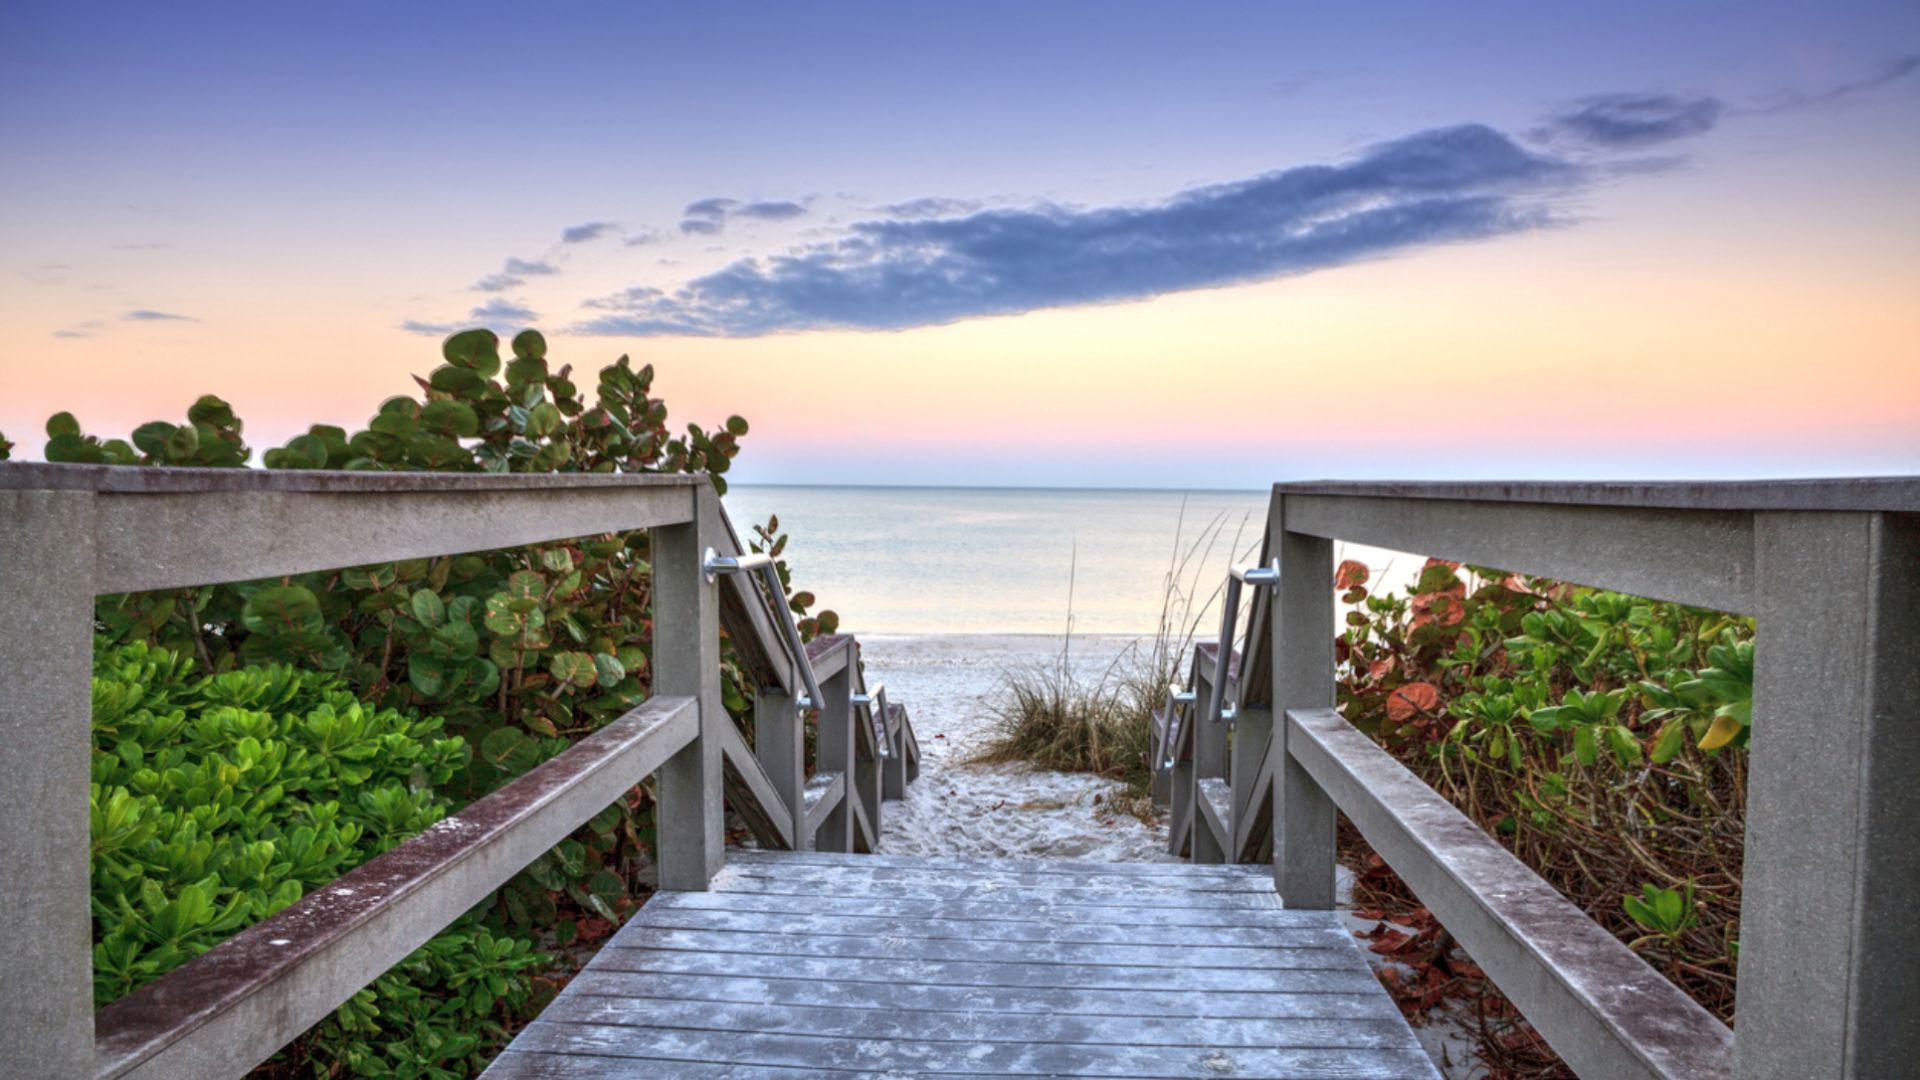 A Wooden Walkway To A Beach